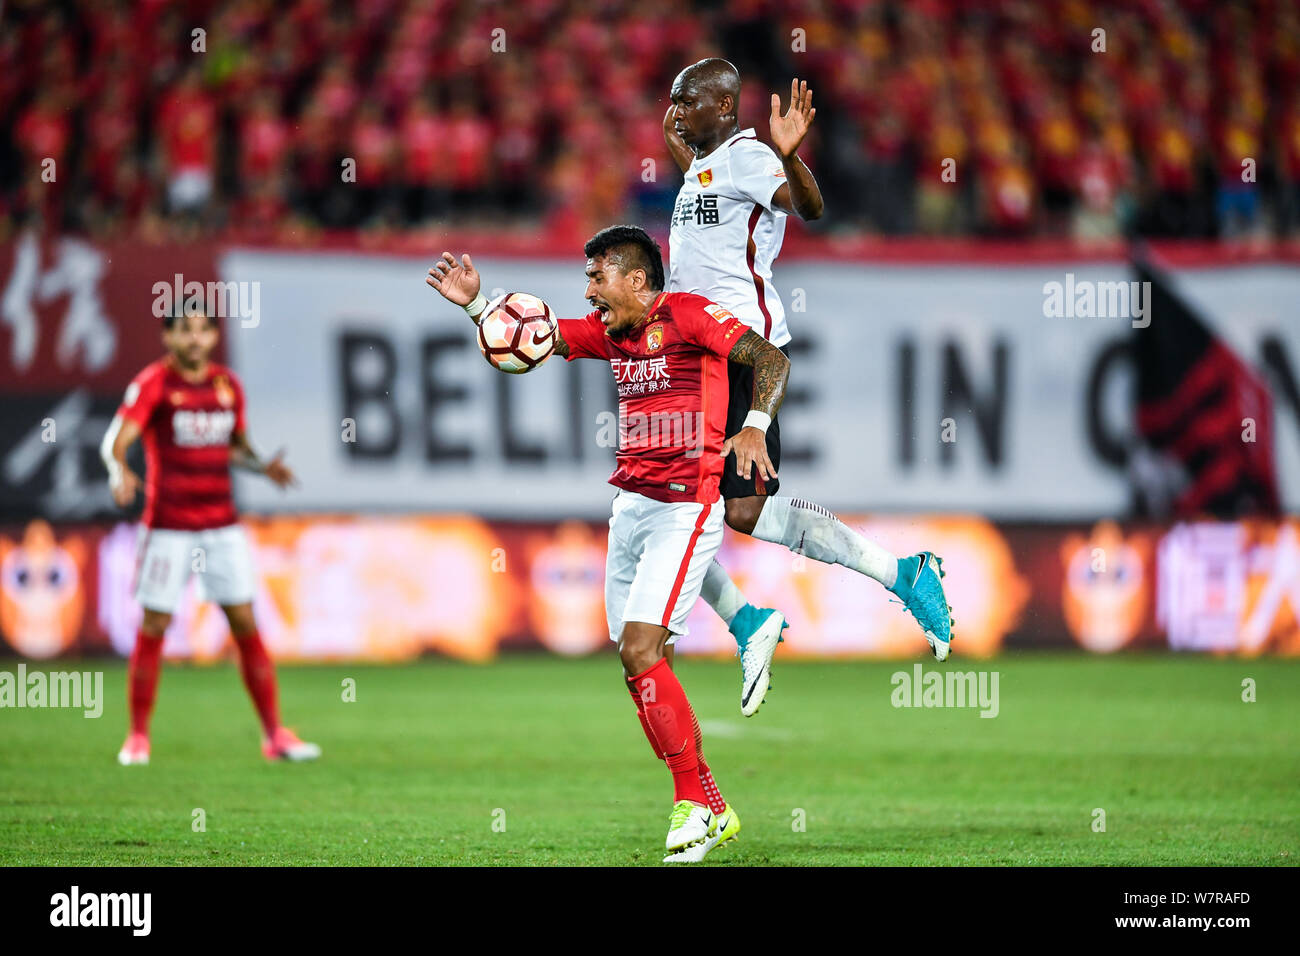 Brazilian football player Paulinho, below, of Guangzhou Evergrande Taobao, challenges Cameroonian soccer player Stephane Mbia of Hebei China Fortune i Stock Photo